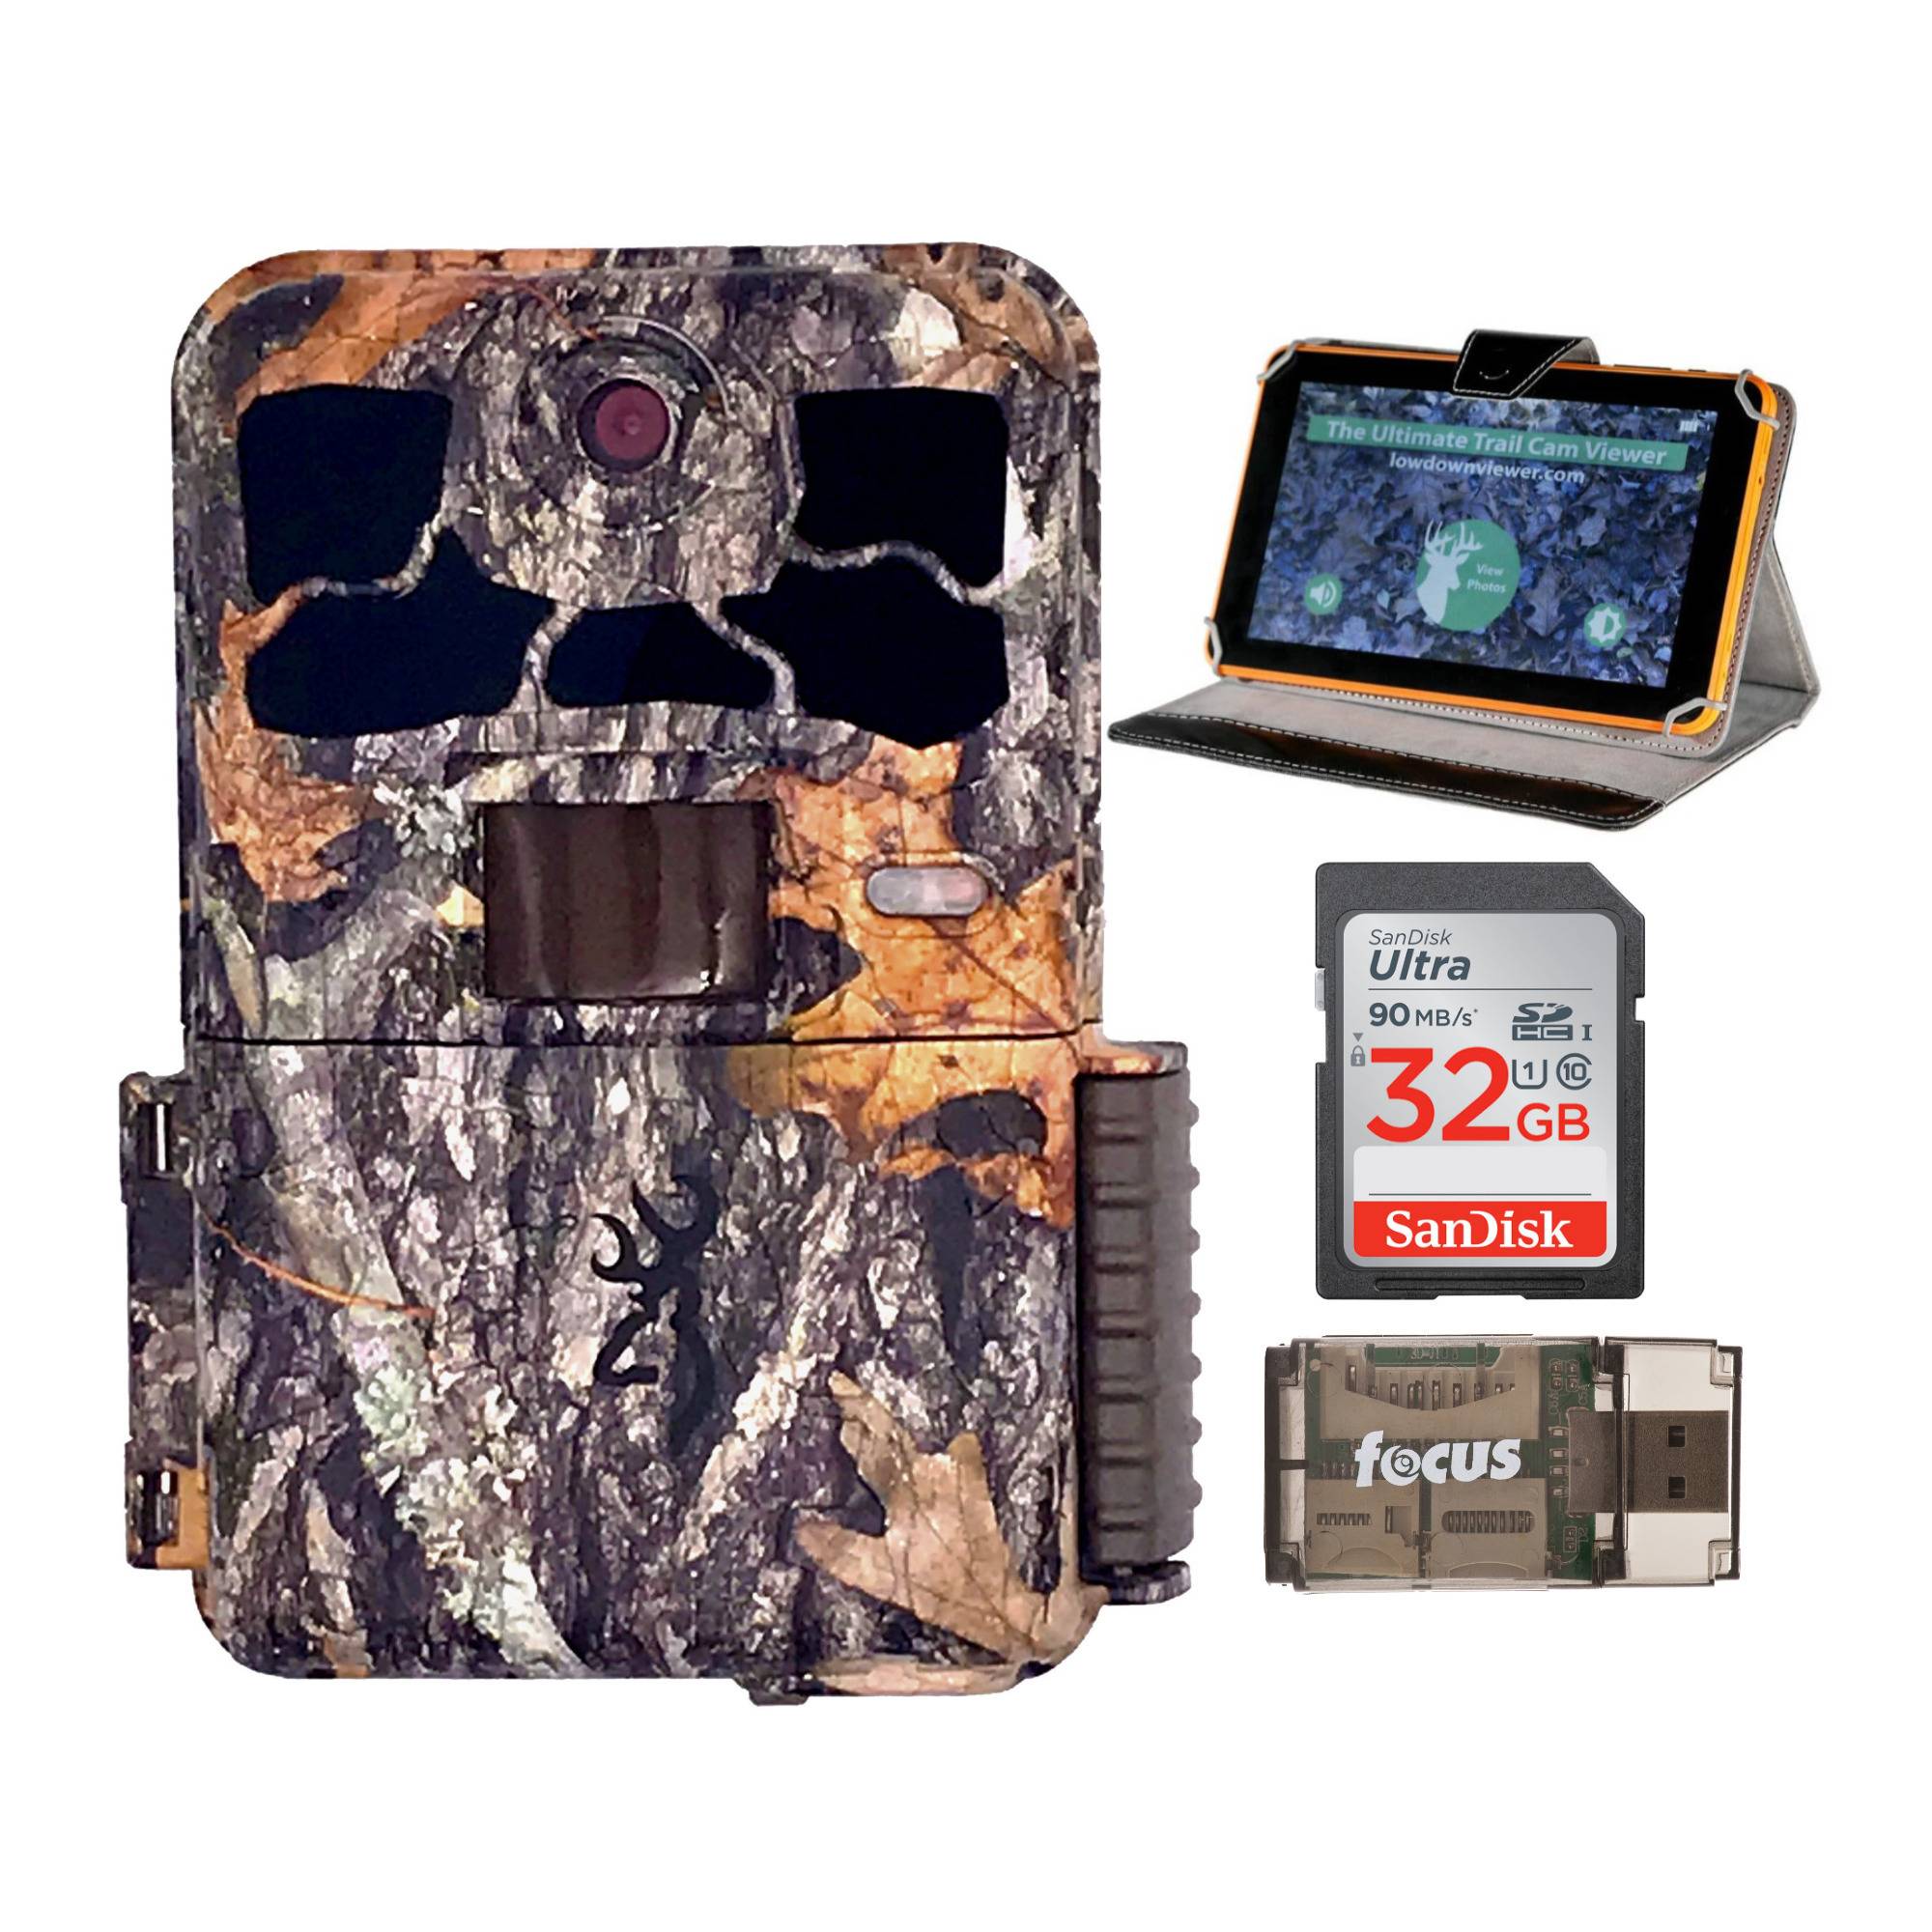 Browning Trail Cameras Spec Ops Elite HP4 22MP Trail Camera with Lowdown 2 Trail Cam Viewer Bundle